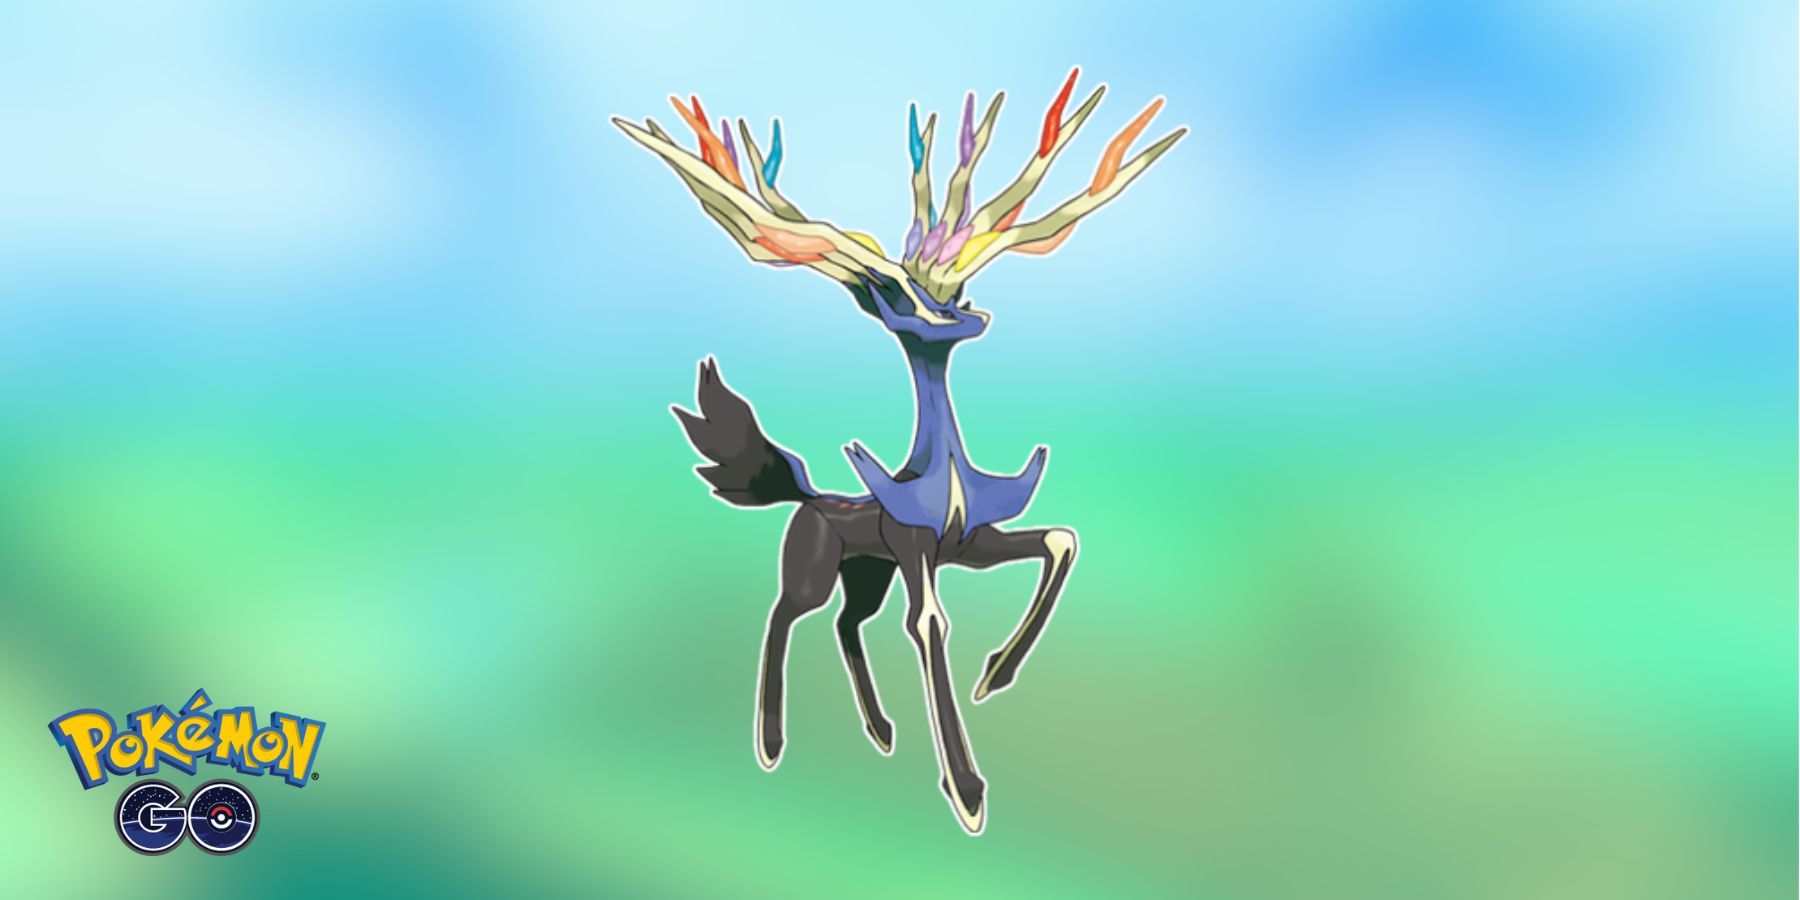 Xerneas Weaknesses and Resistances in Pokemon GO